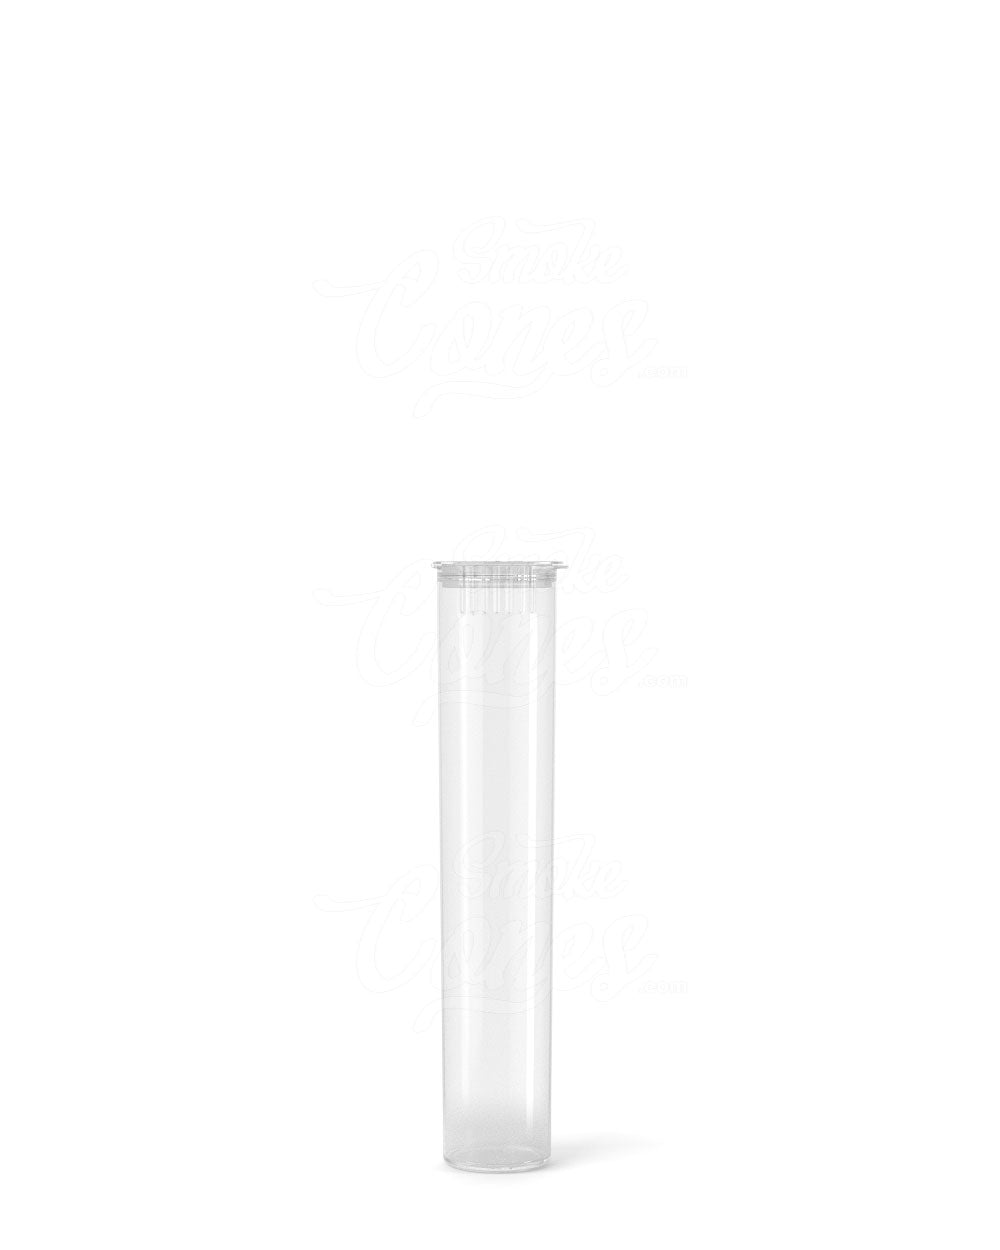 70mm Clear Opaque Child Resistant Pop Top Plastic Pre-Roll Tubes 1000/Box - 2